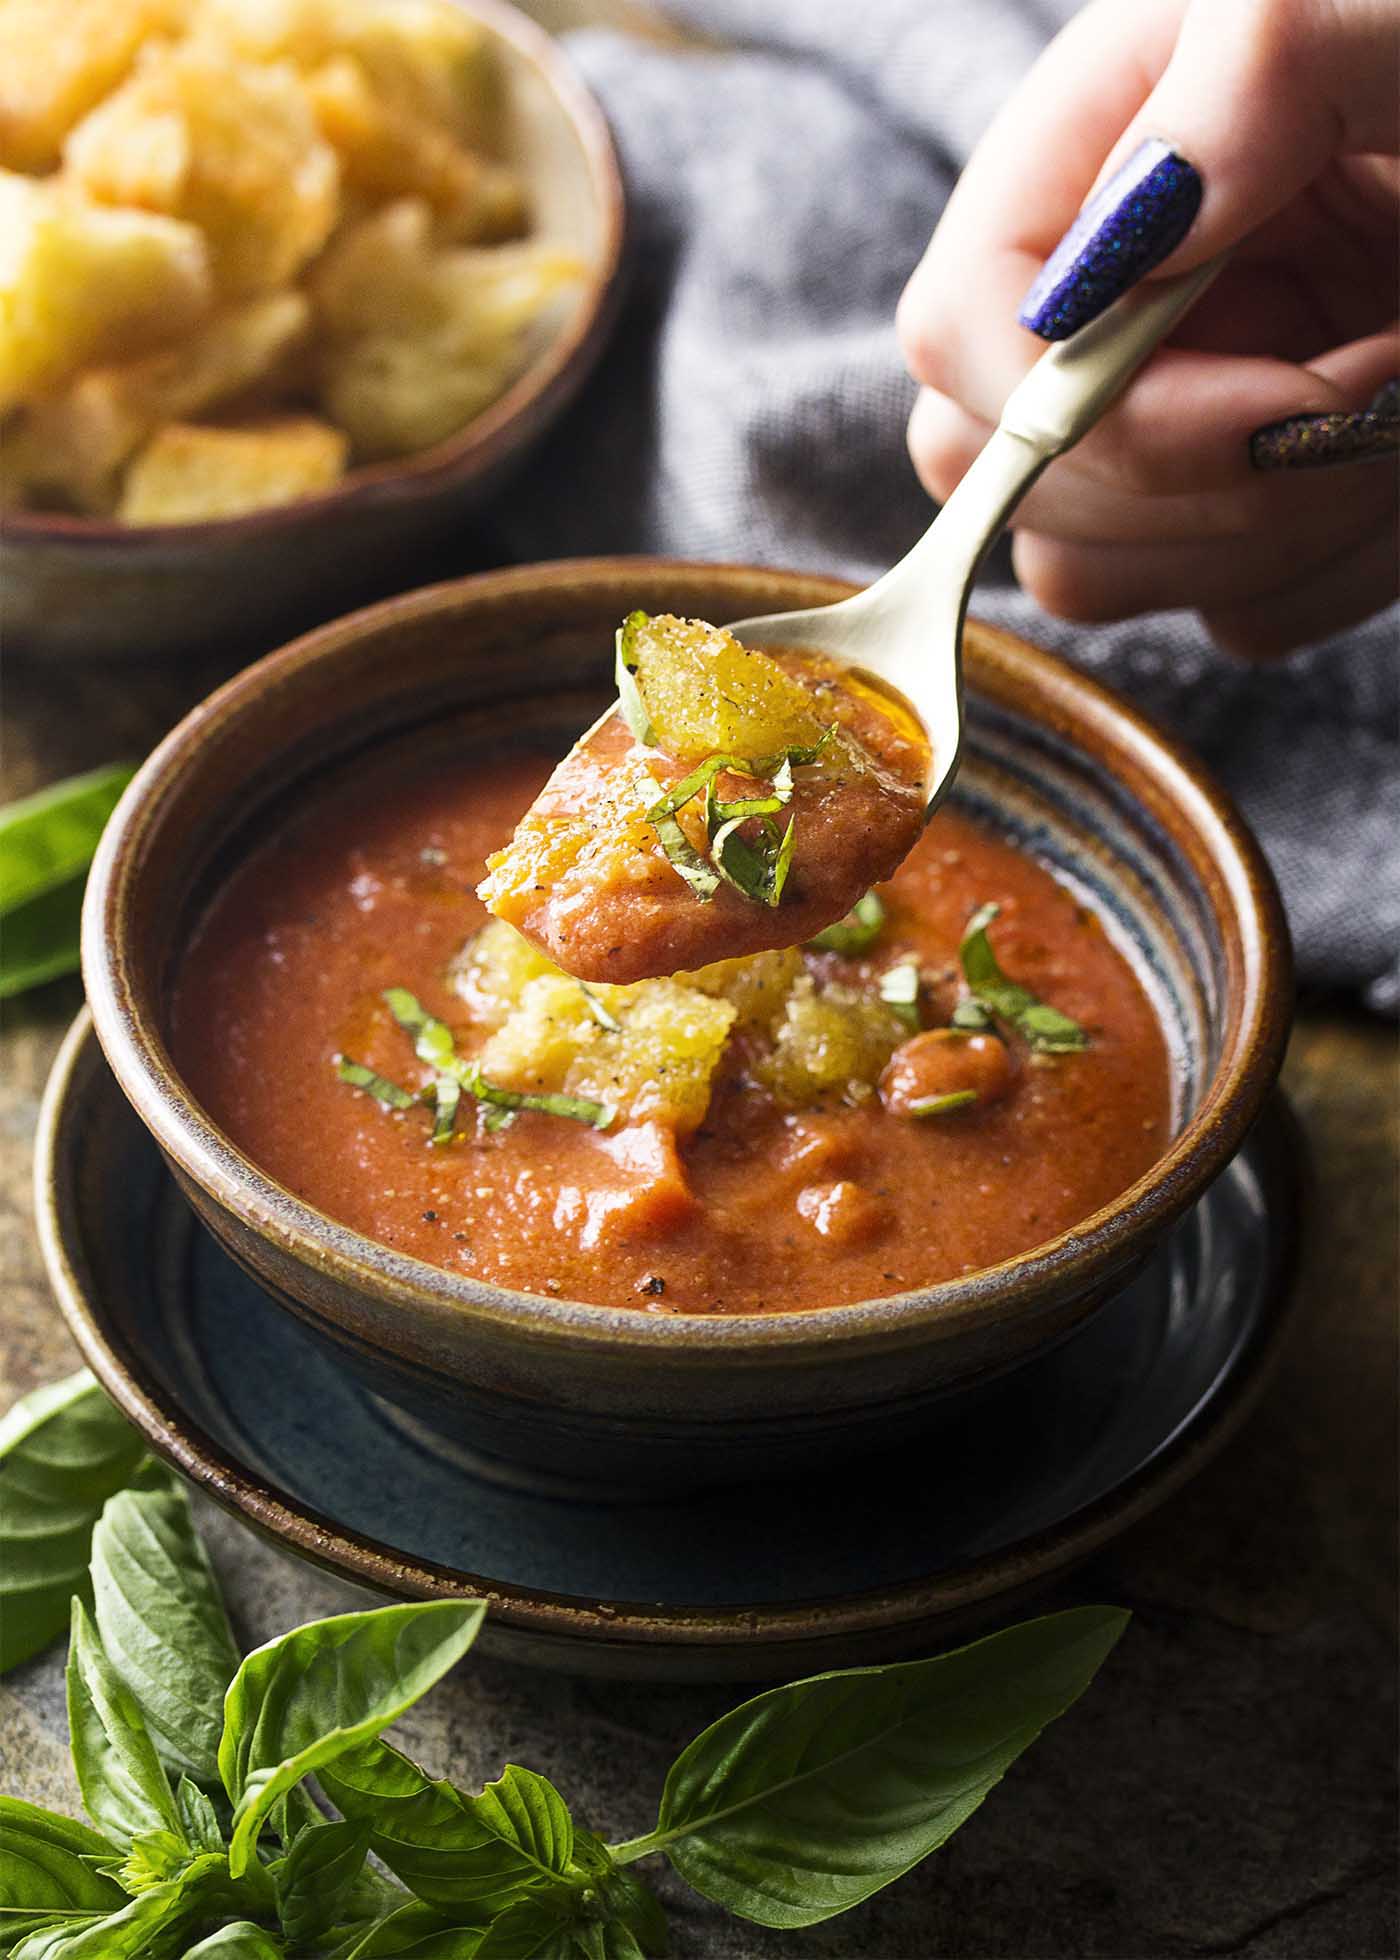 A hand holding up a spoonful of salmorejo soup over the bowl.